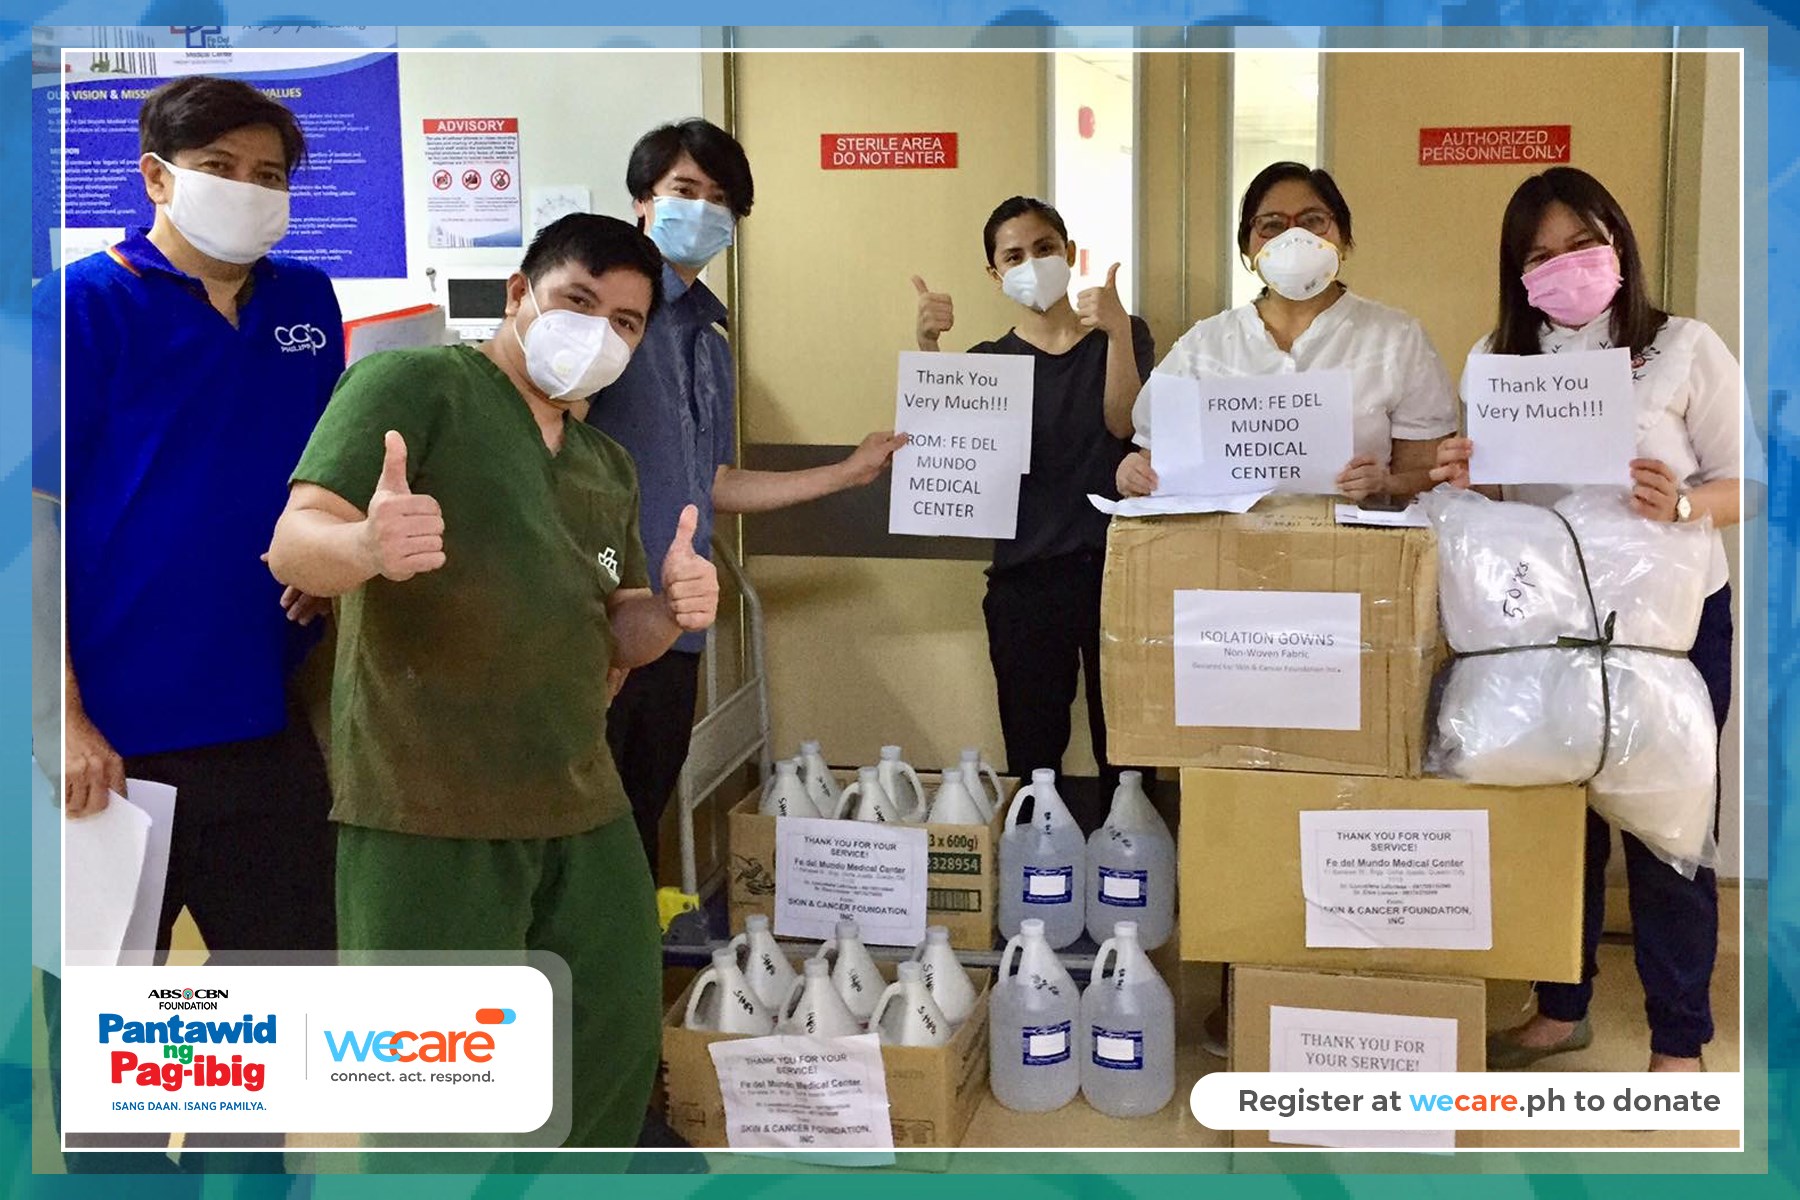 WeCARE delivers PPEs and supplies where it's most needed. CIC's corporate responsibility effort